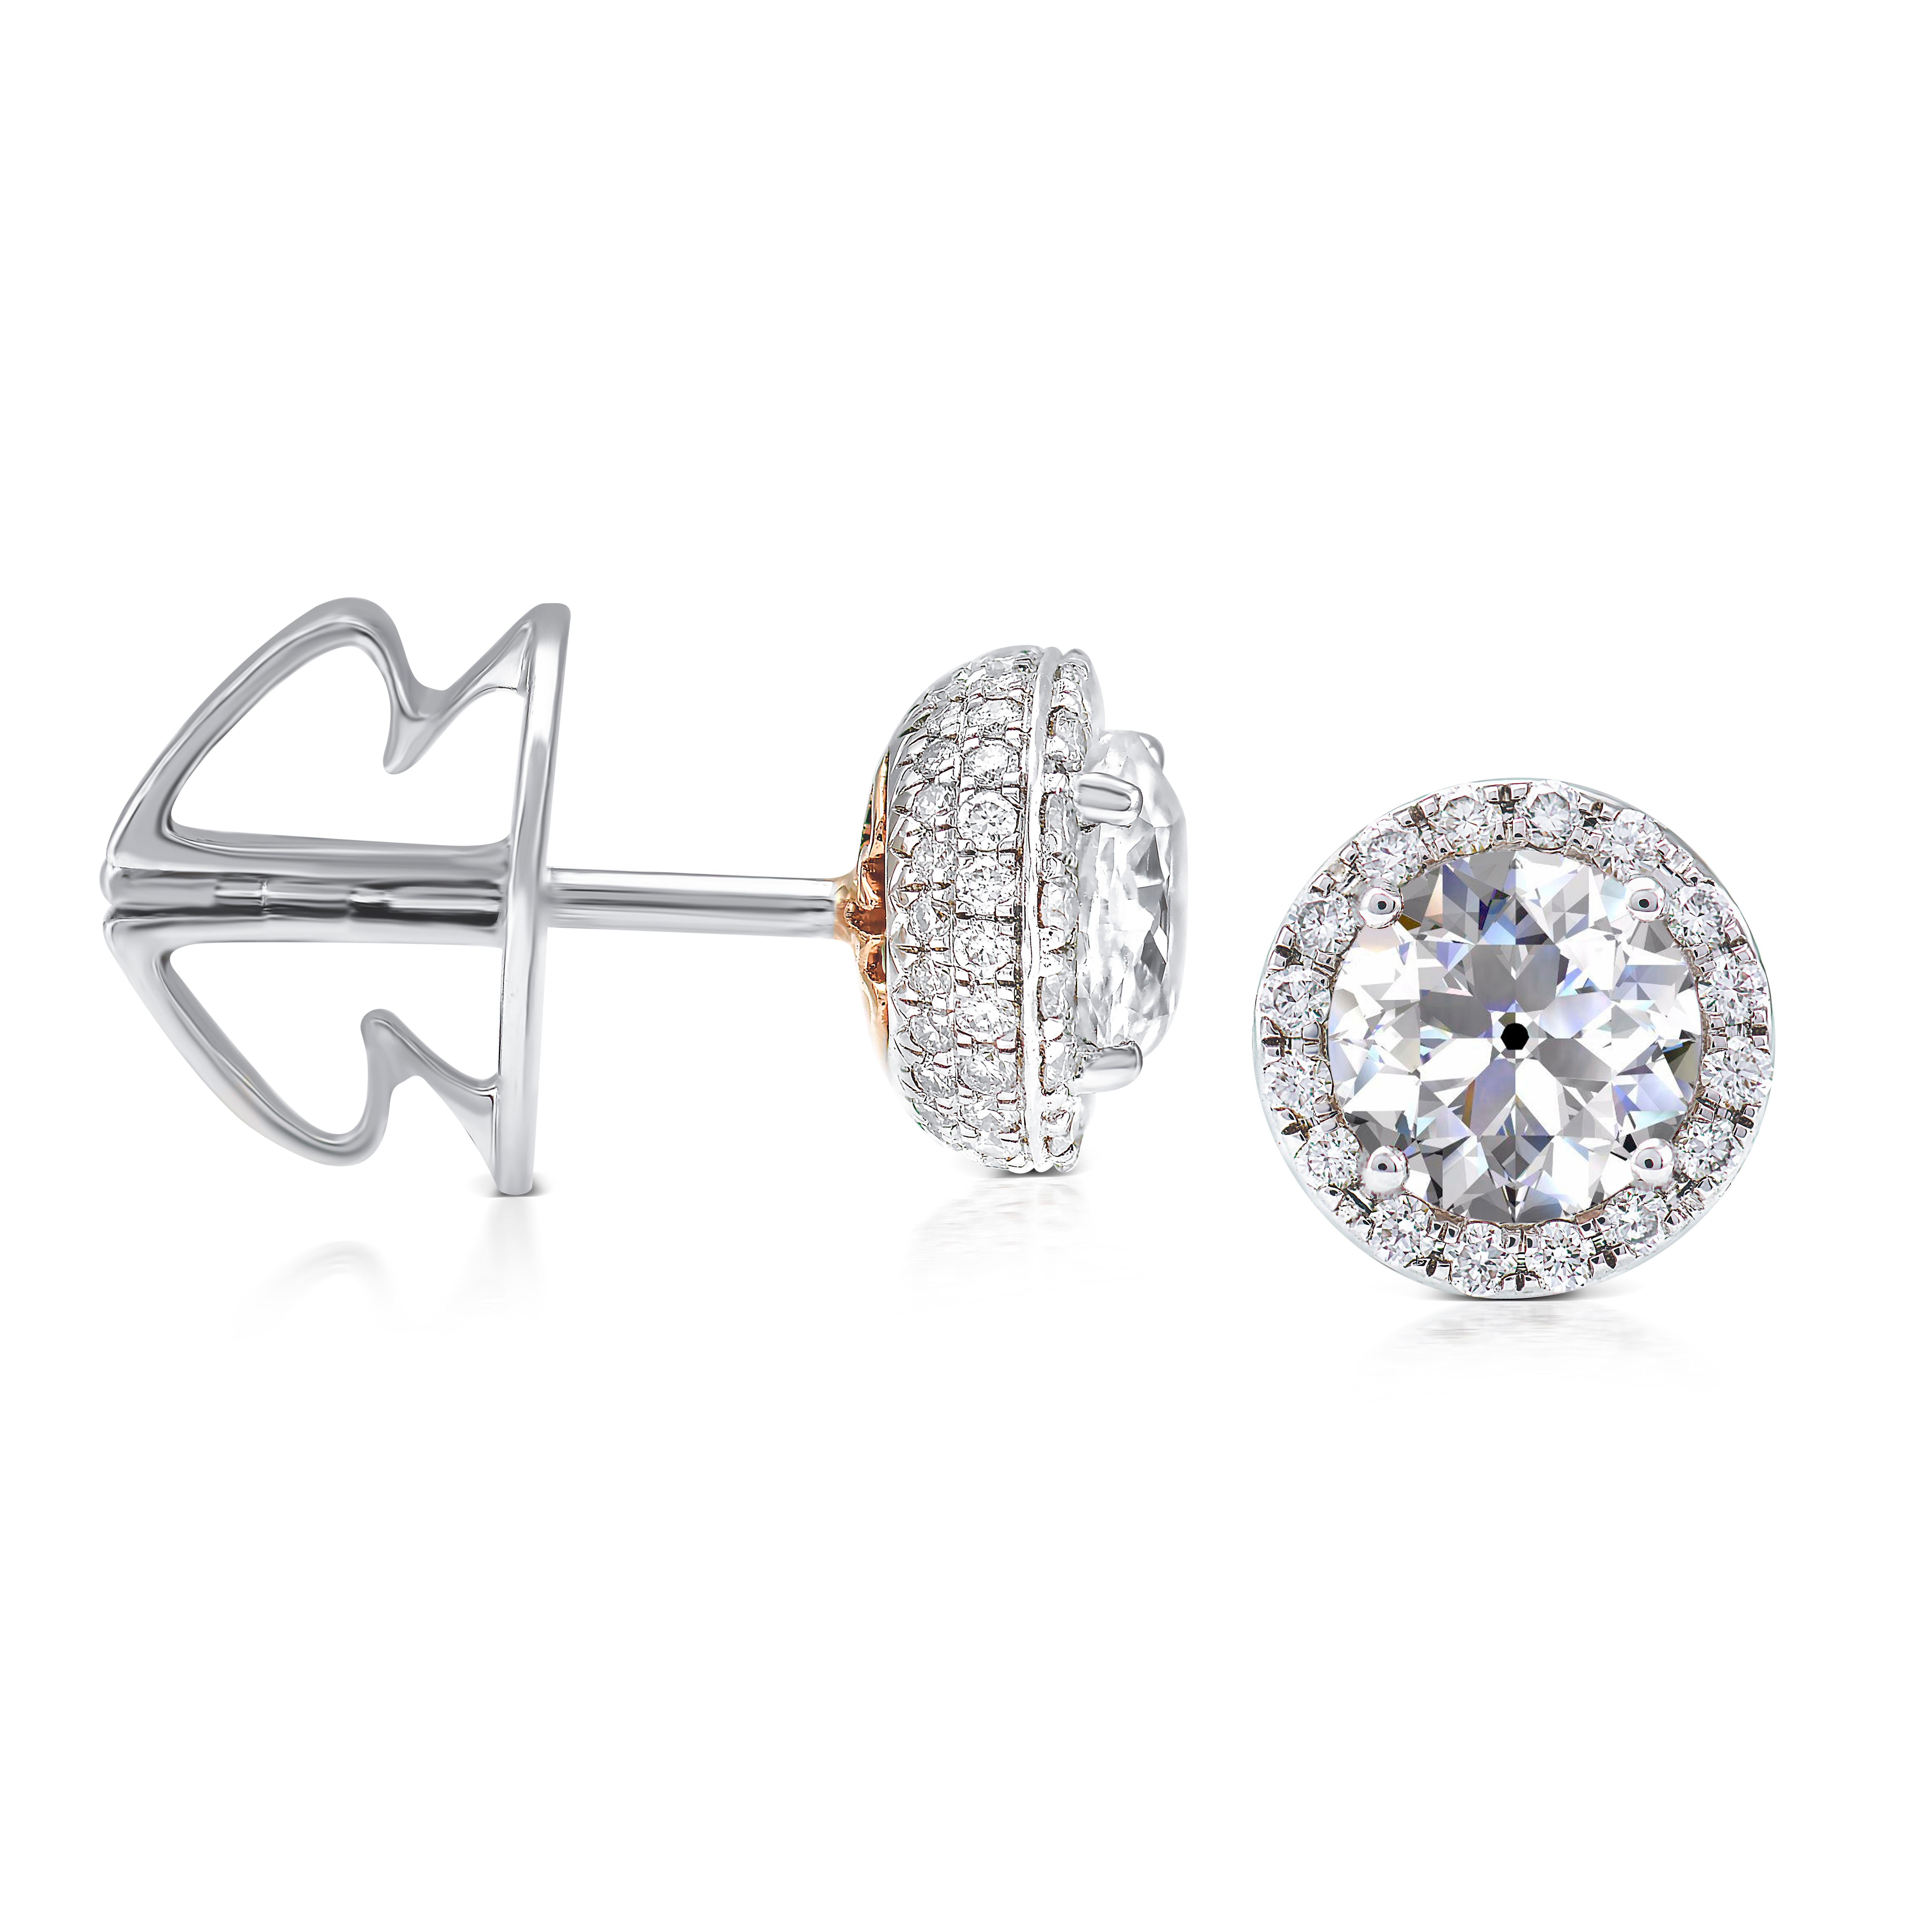 These exquisite Rarever earrings feature a stunning combination of old cut diamonds and white gold. Each earring showcases a 0.50ct old European brilliant cut diamond with F color and VS clarity, delicately surrounded by a halo of over a hundred